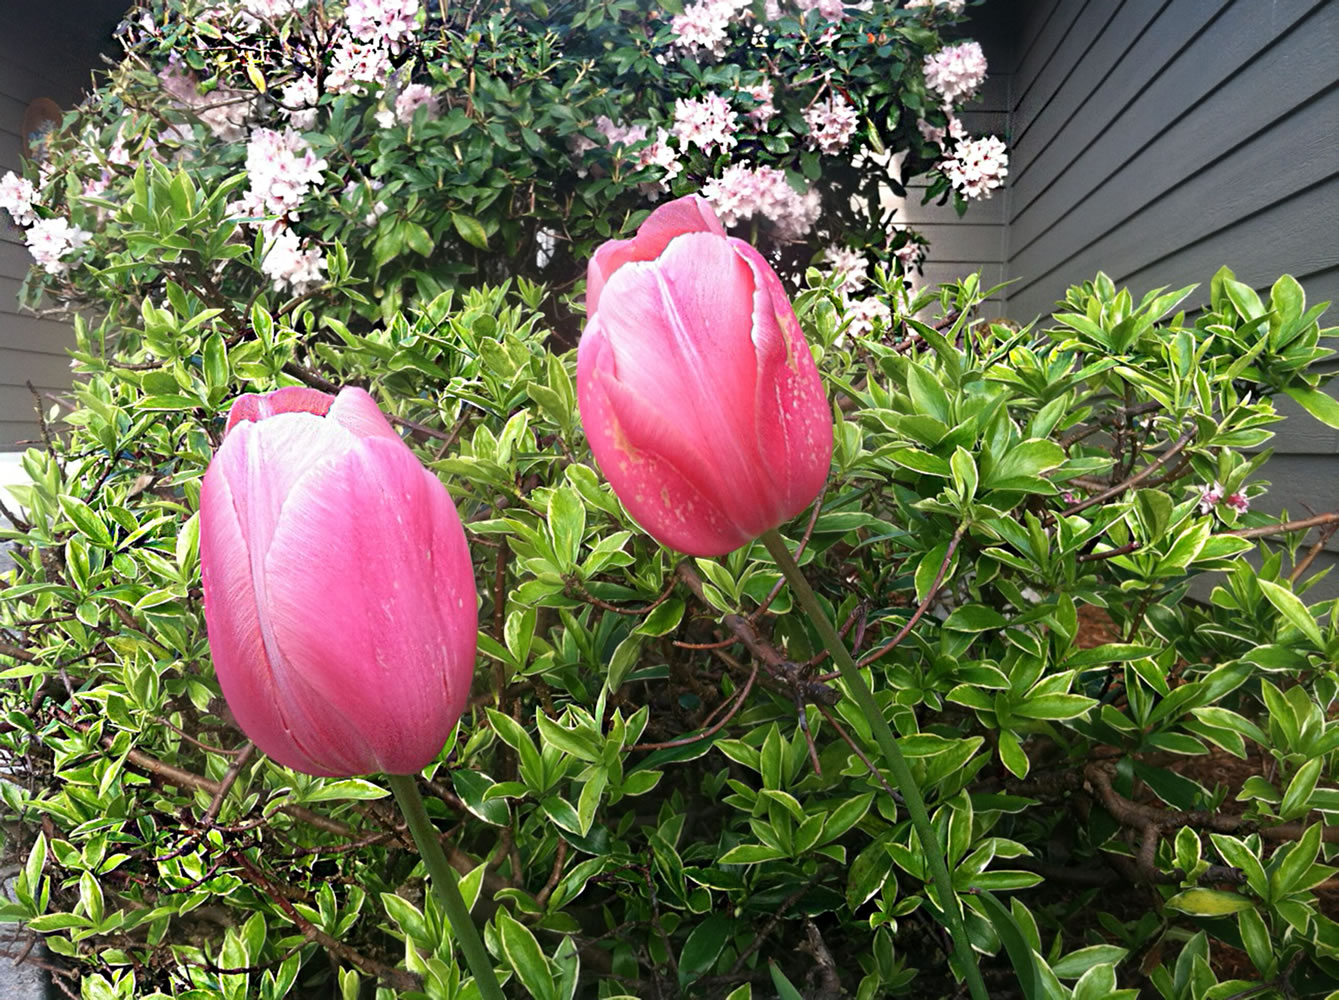 Tulips and rhododendrons bloom in a Vancouver yard.